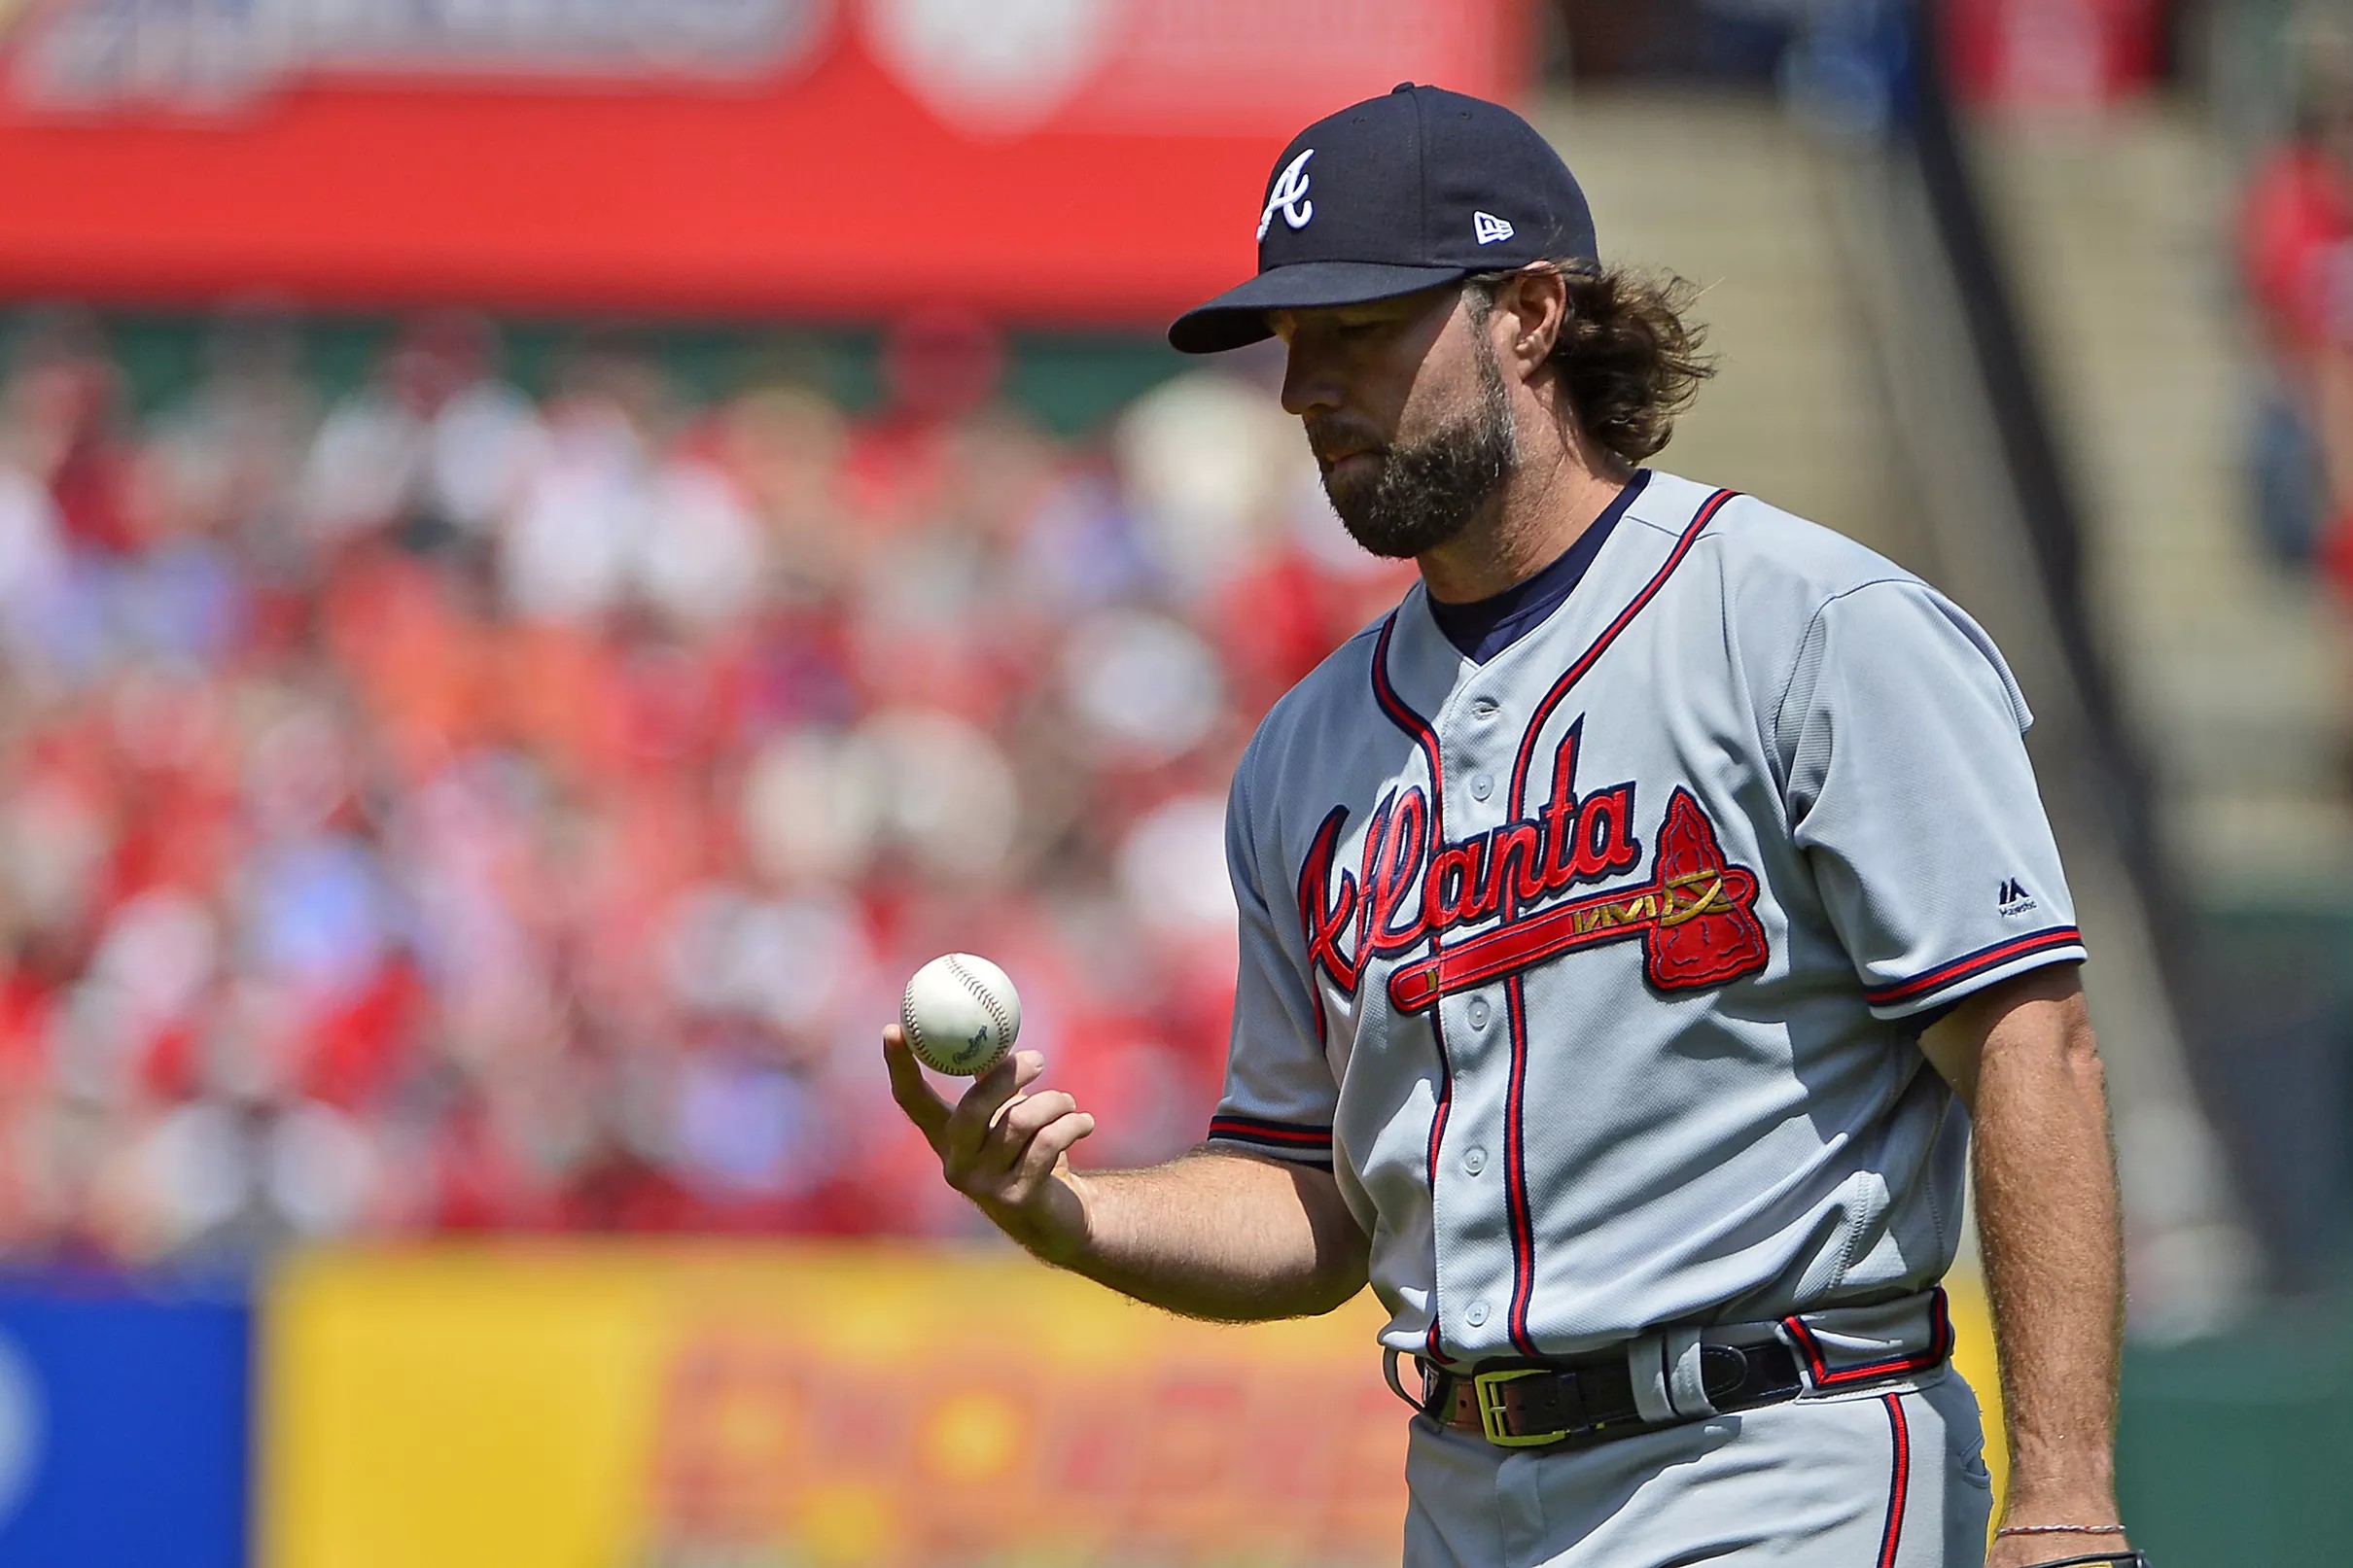 Cardinals news and notes: The former Braves